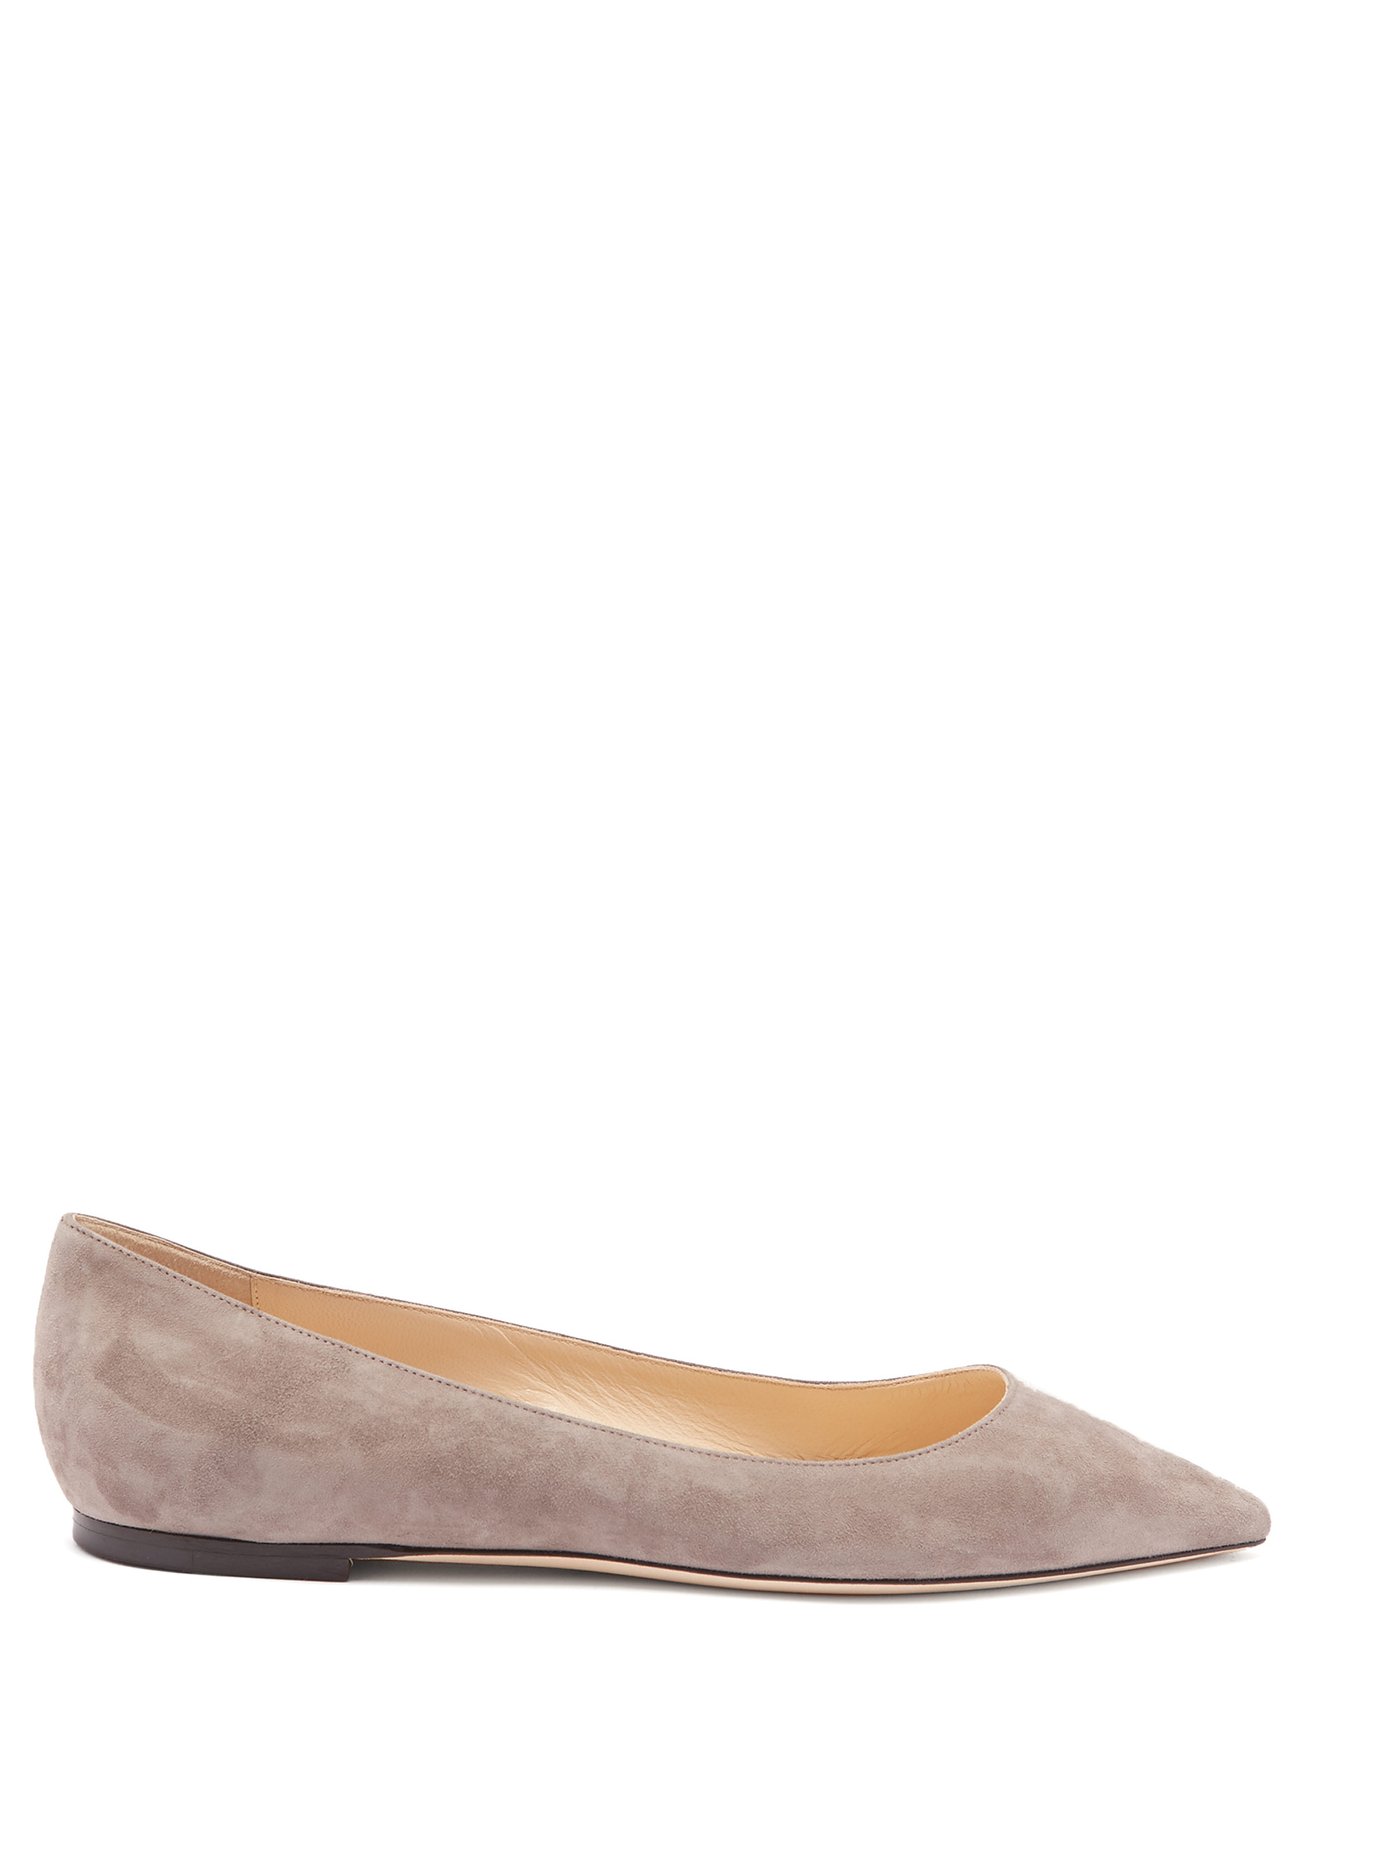 pointed flats uk